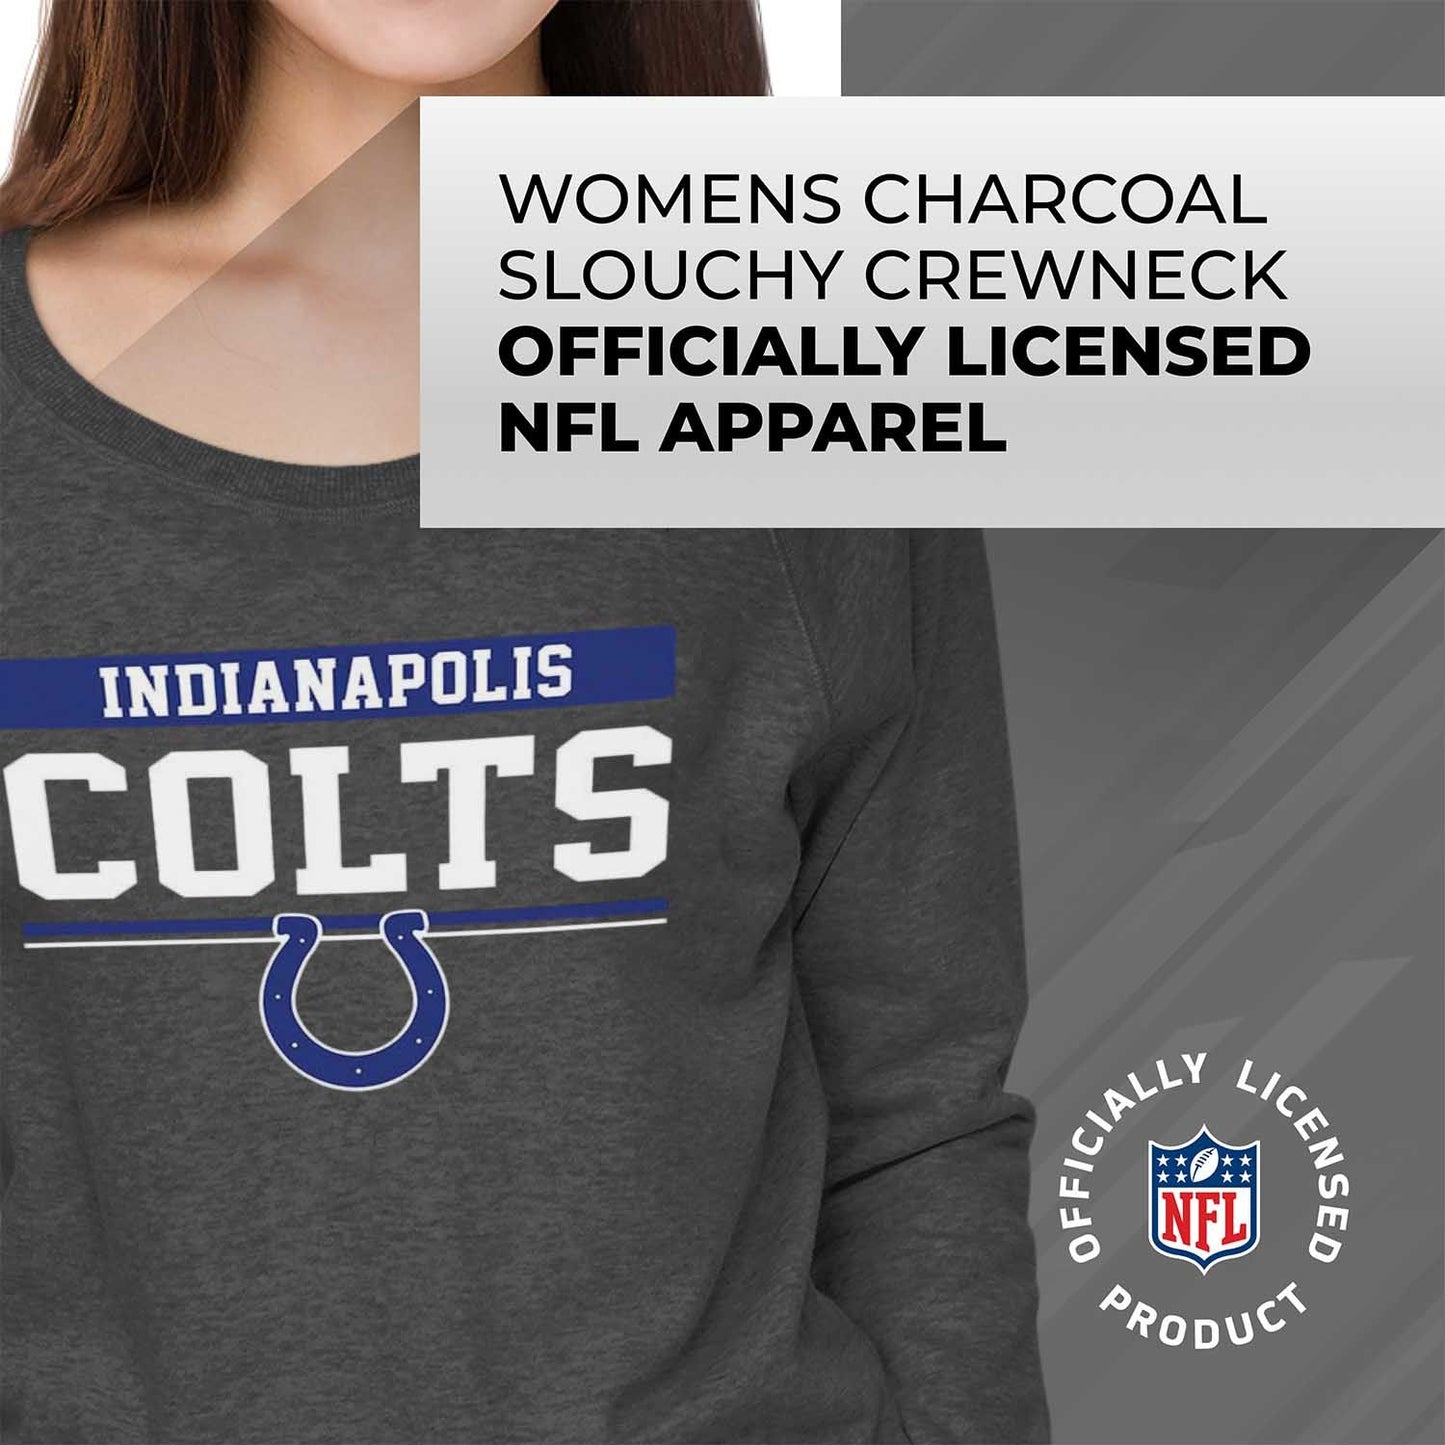 Indianapolis Colts NFL Womens Charcoal Crew Neck Football Apparel - Charcoal